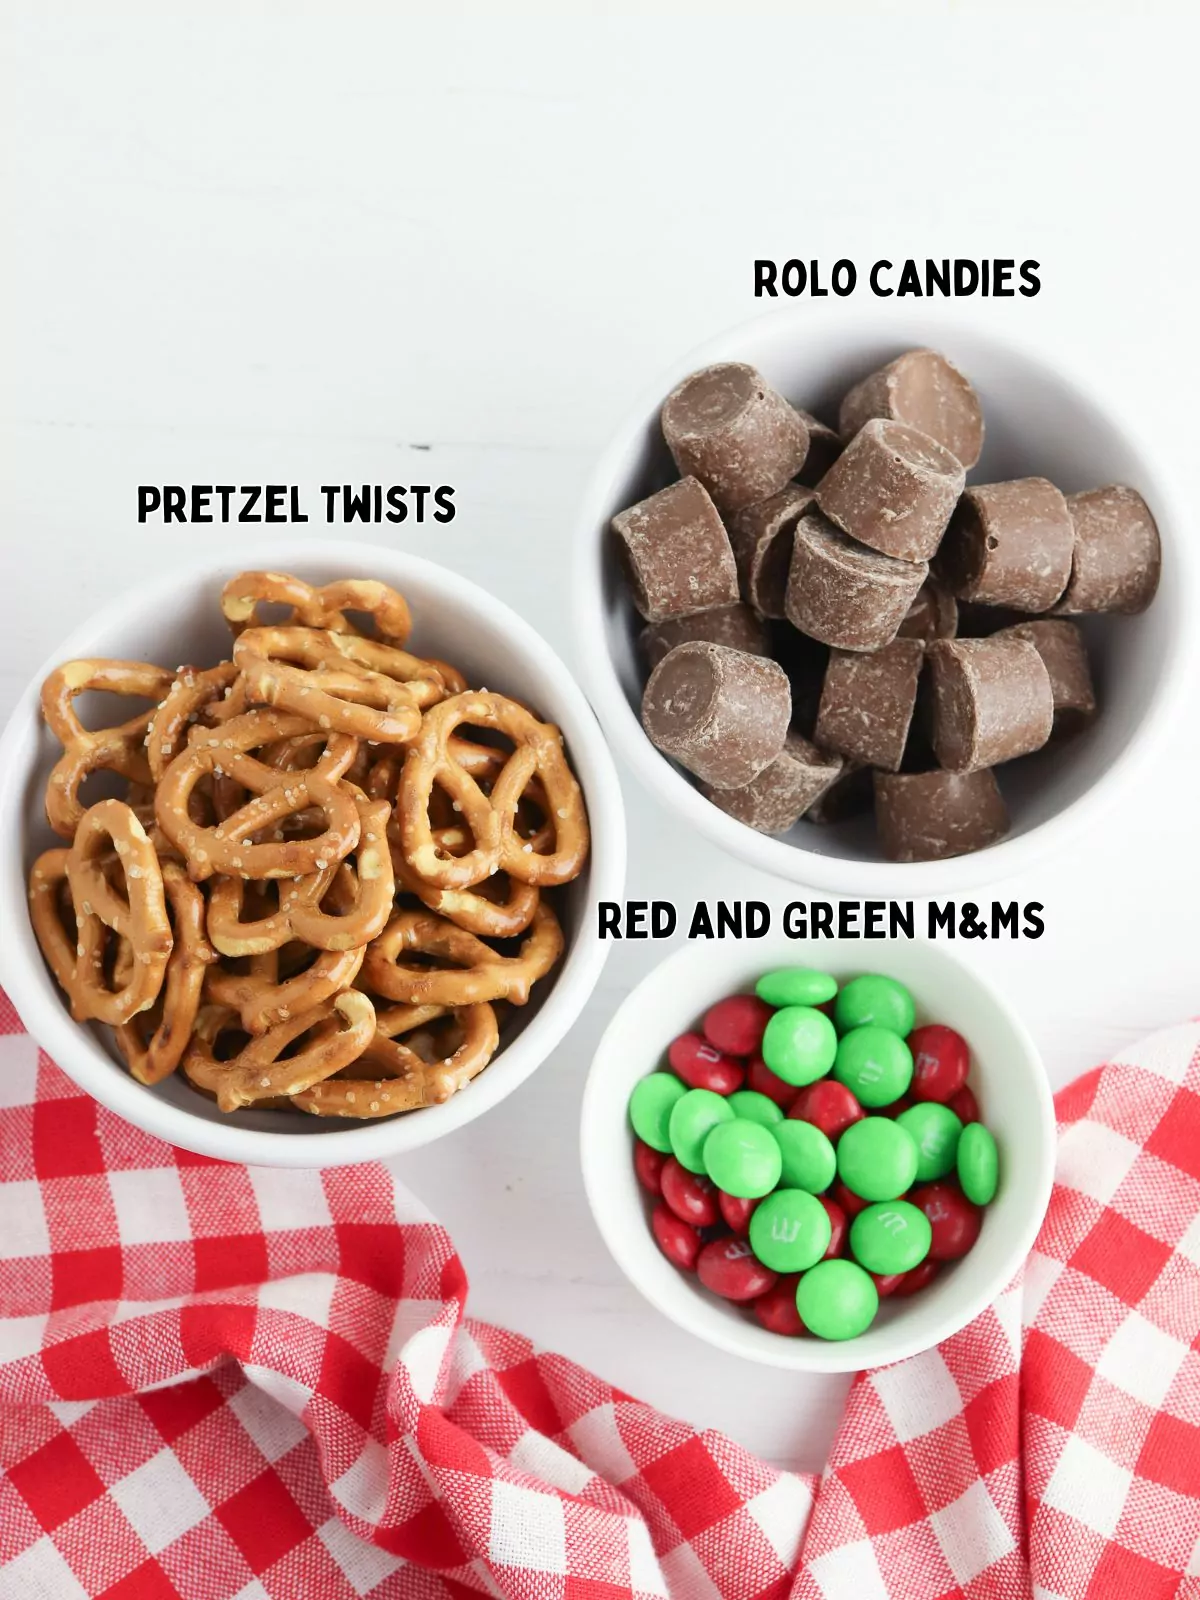 Ingredients for Reindeer treats with Rolo candies.